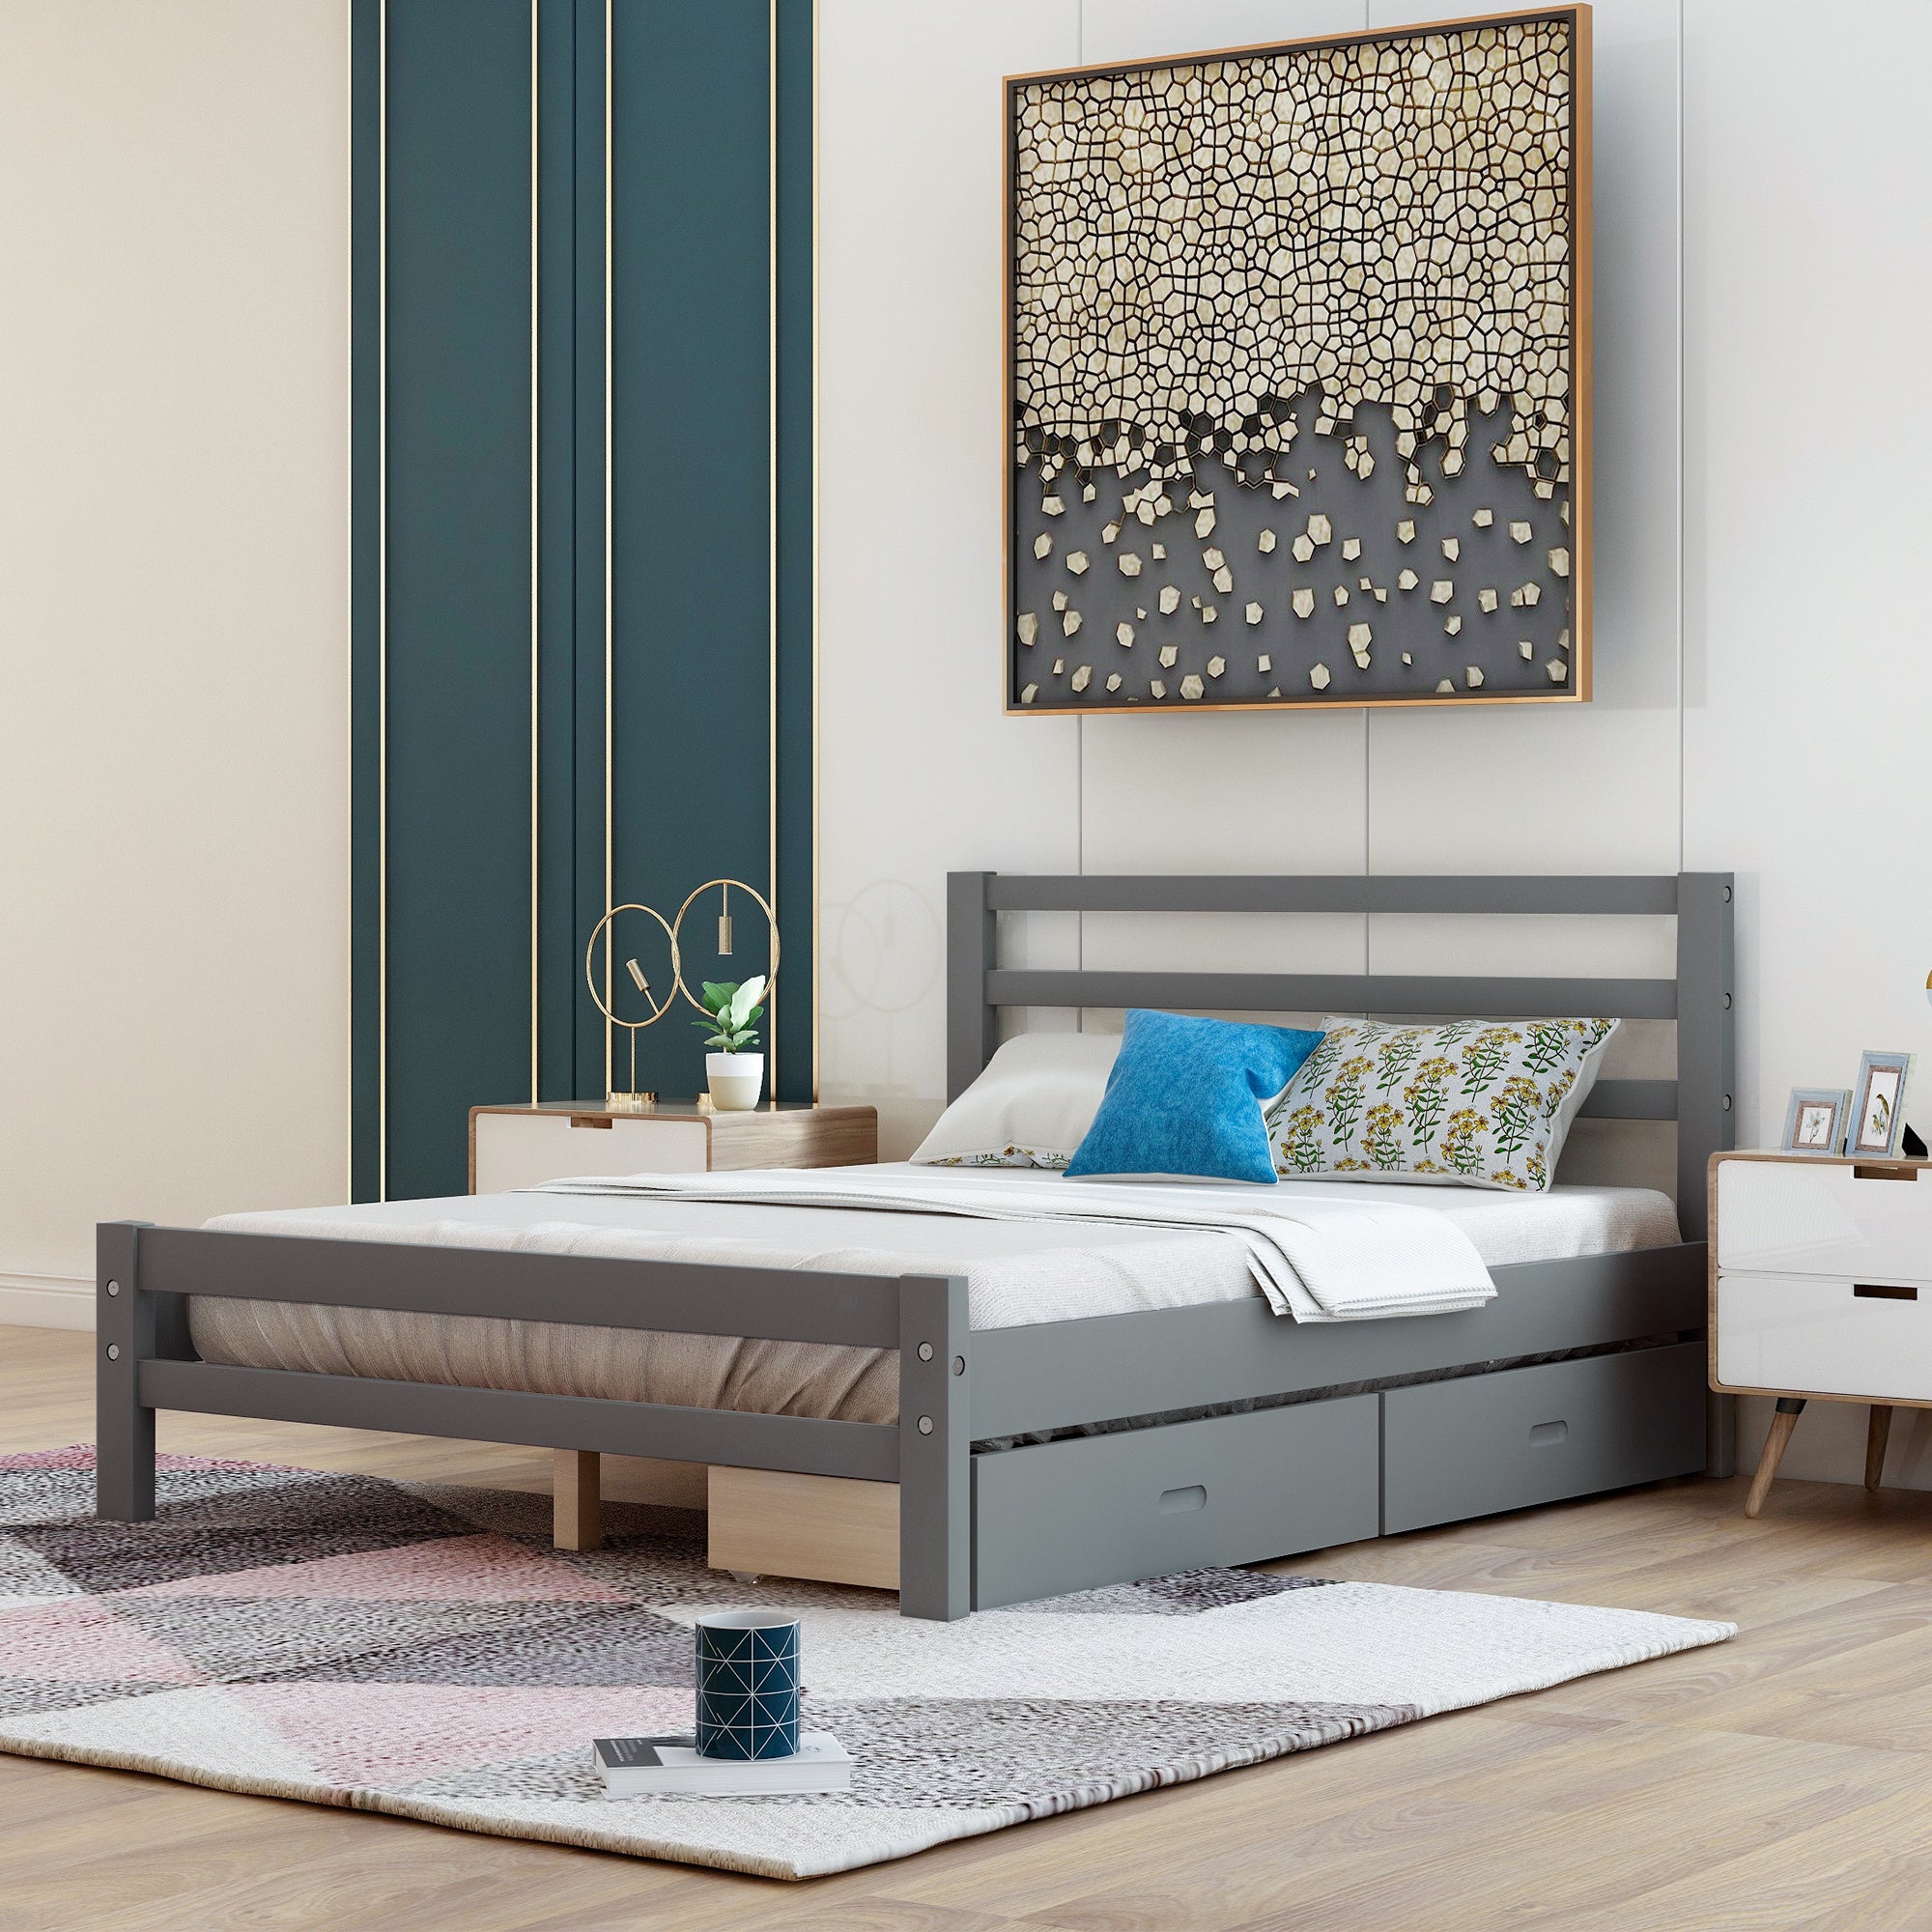 Wood Platform Bed With Two Drawers - Twin